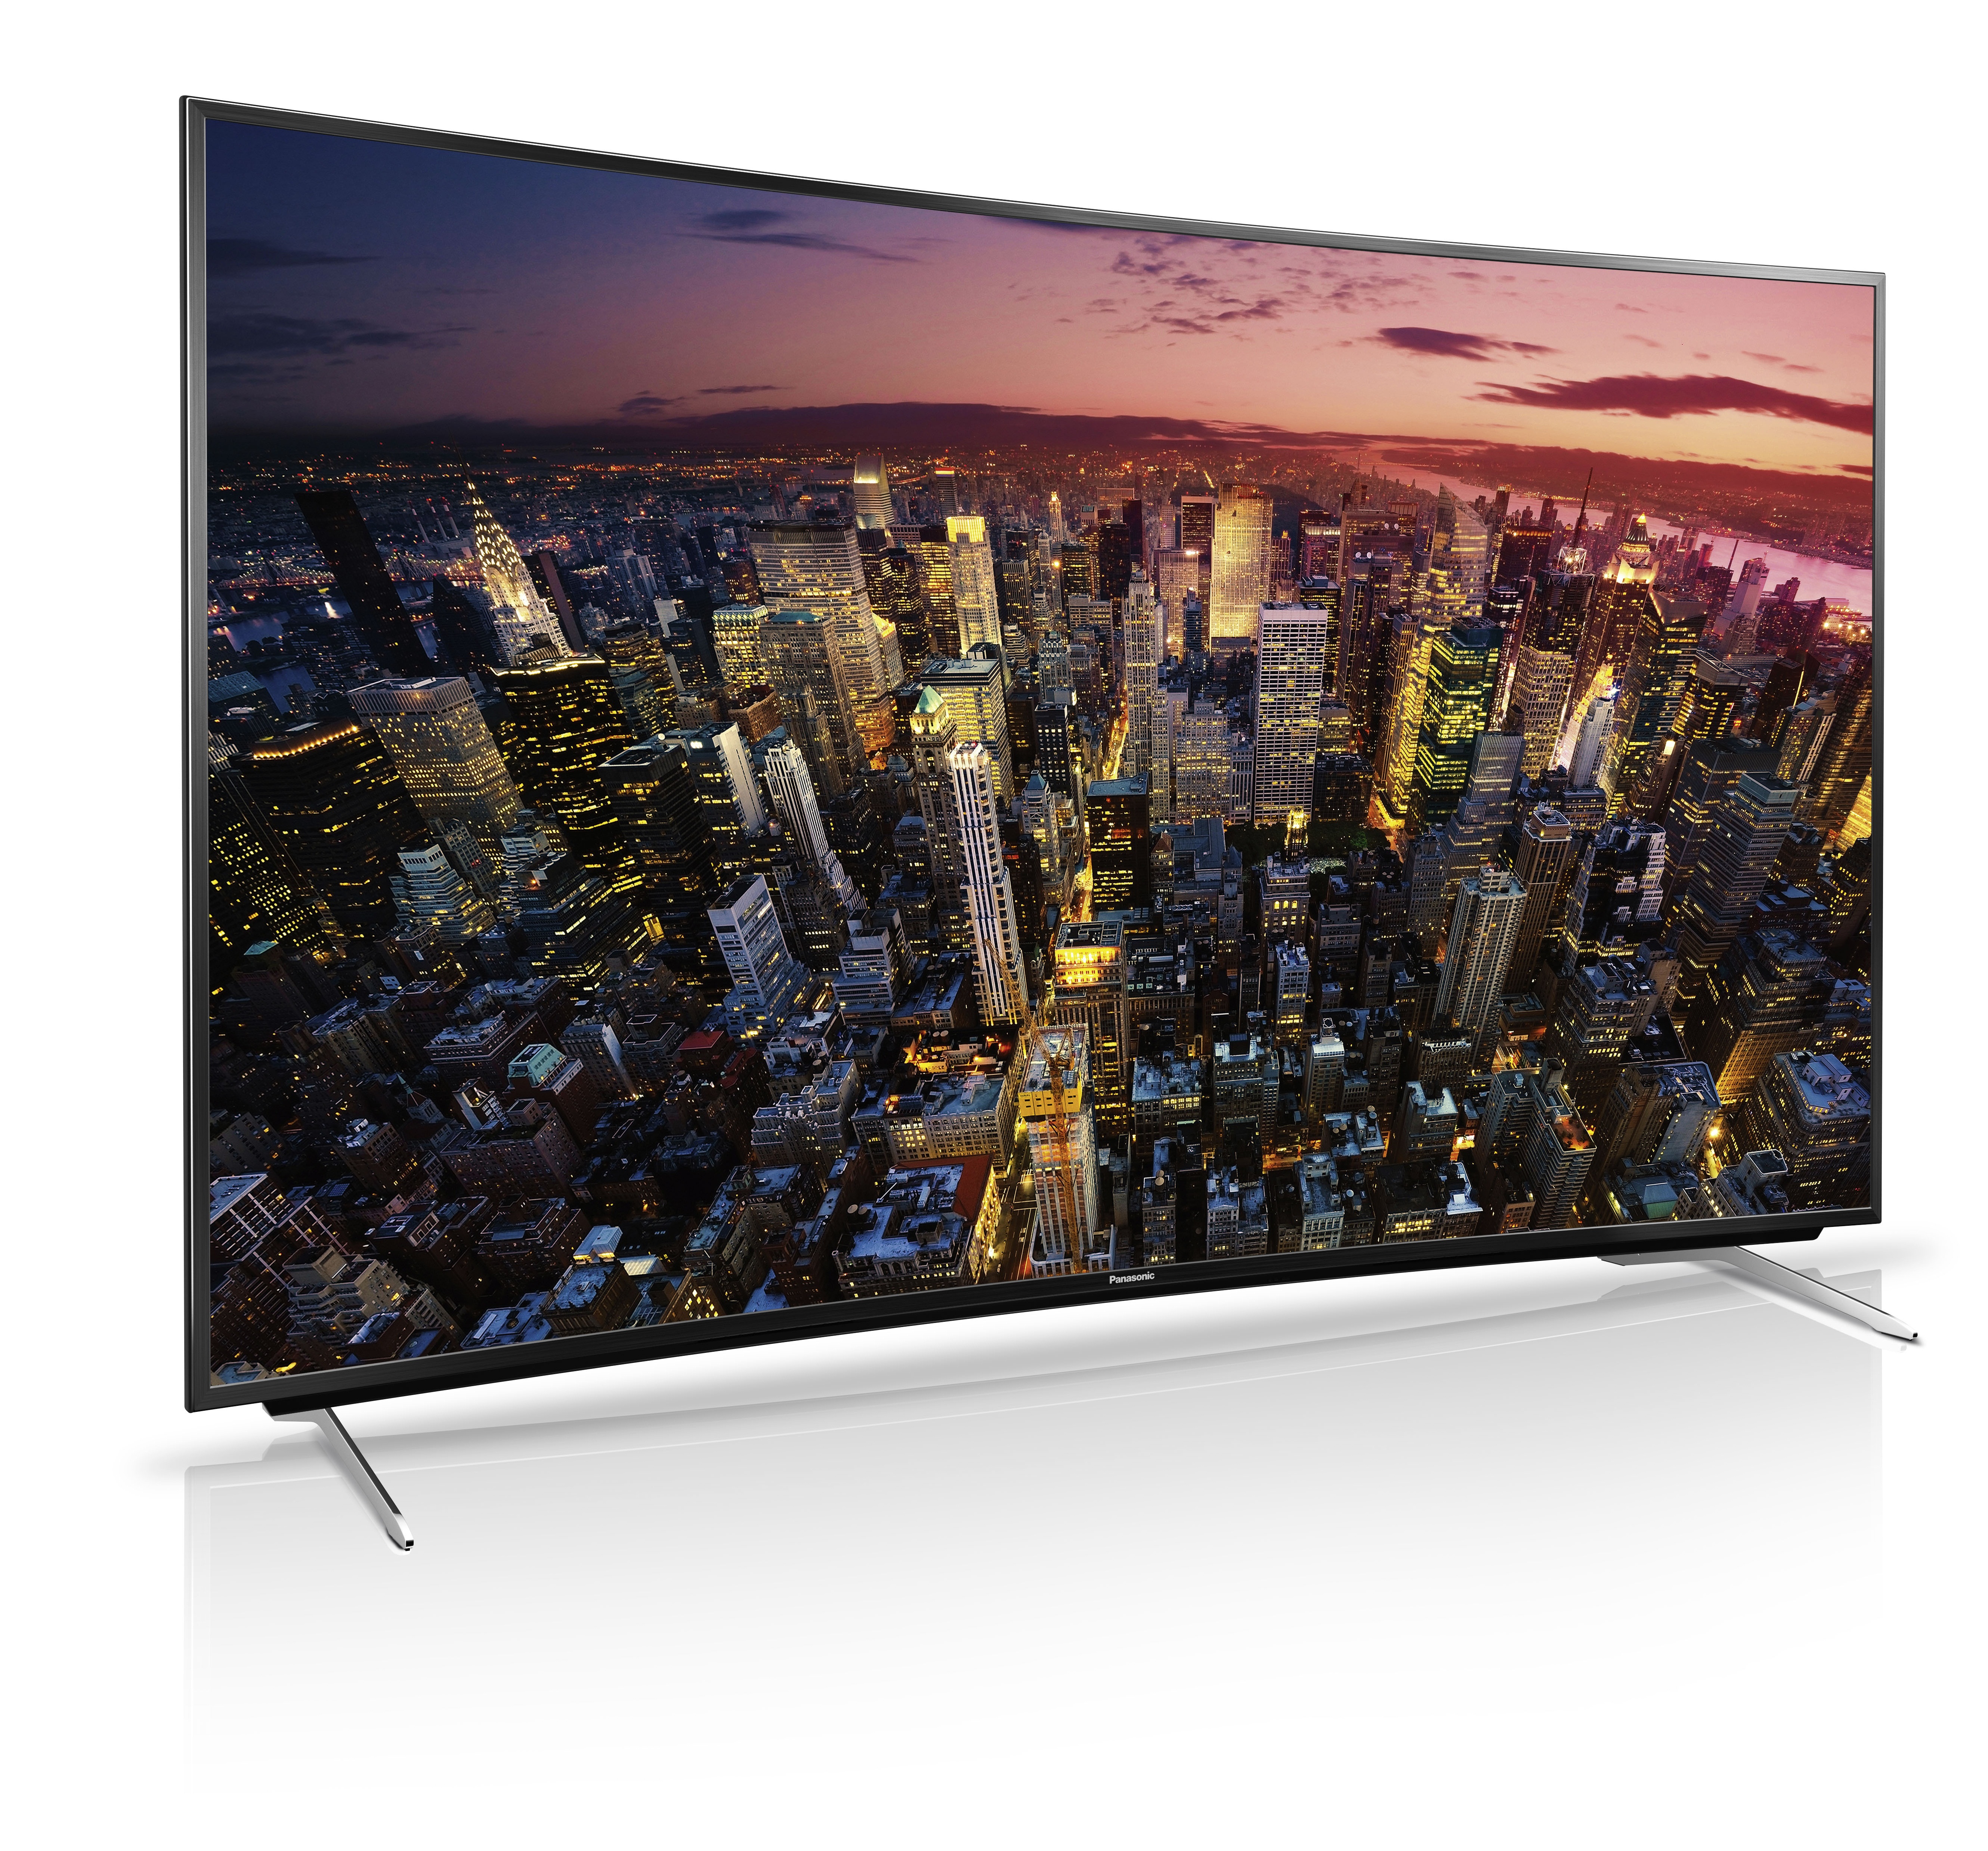 Panasonic Teams Up With Mozilla For Firefox OS-Powered Smart TVs & Open  Standards Push